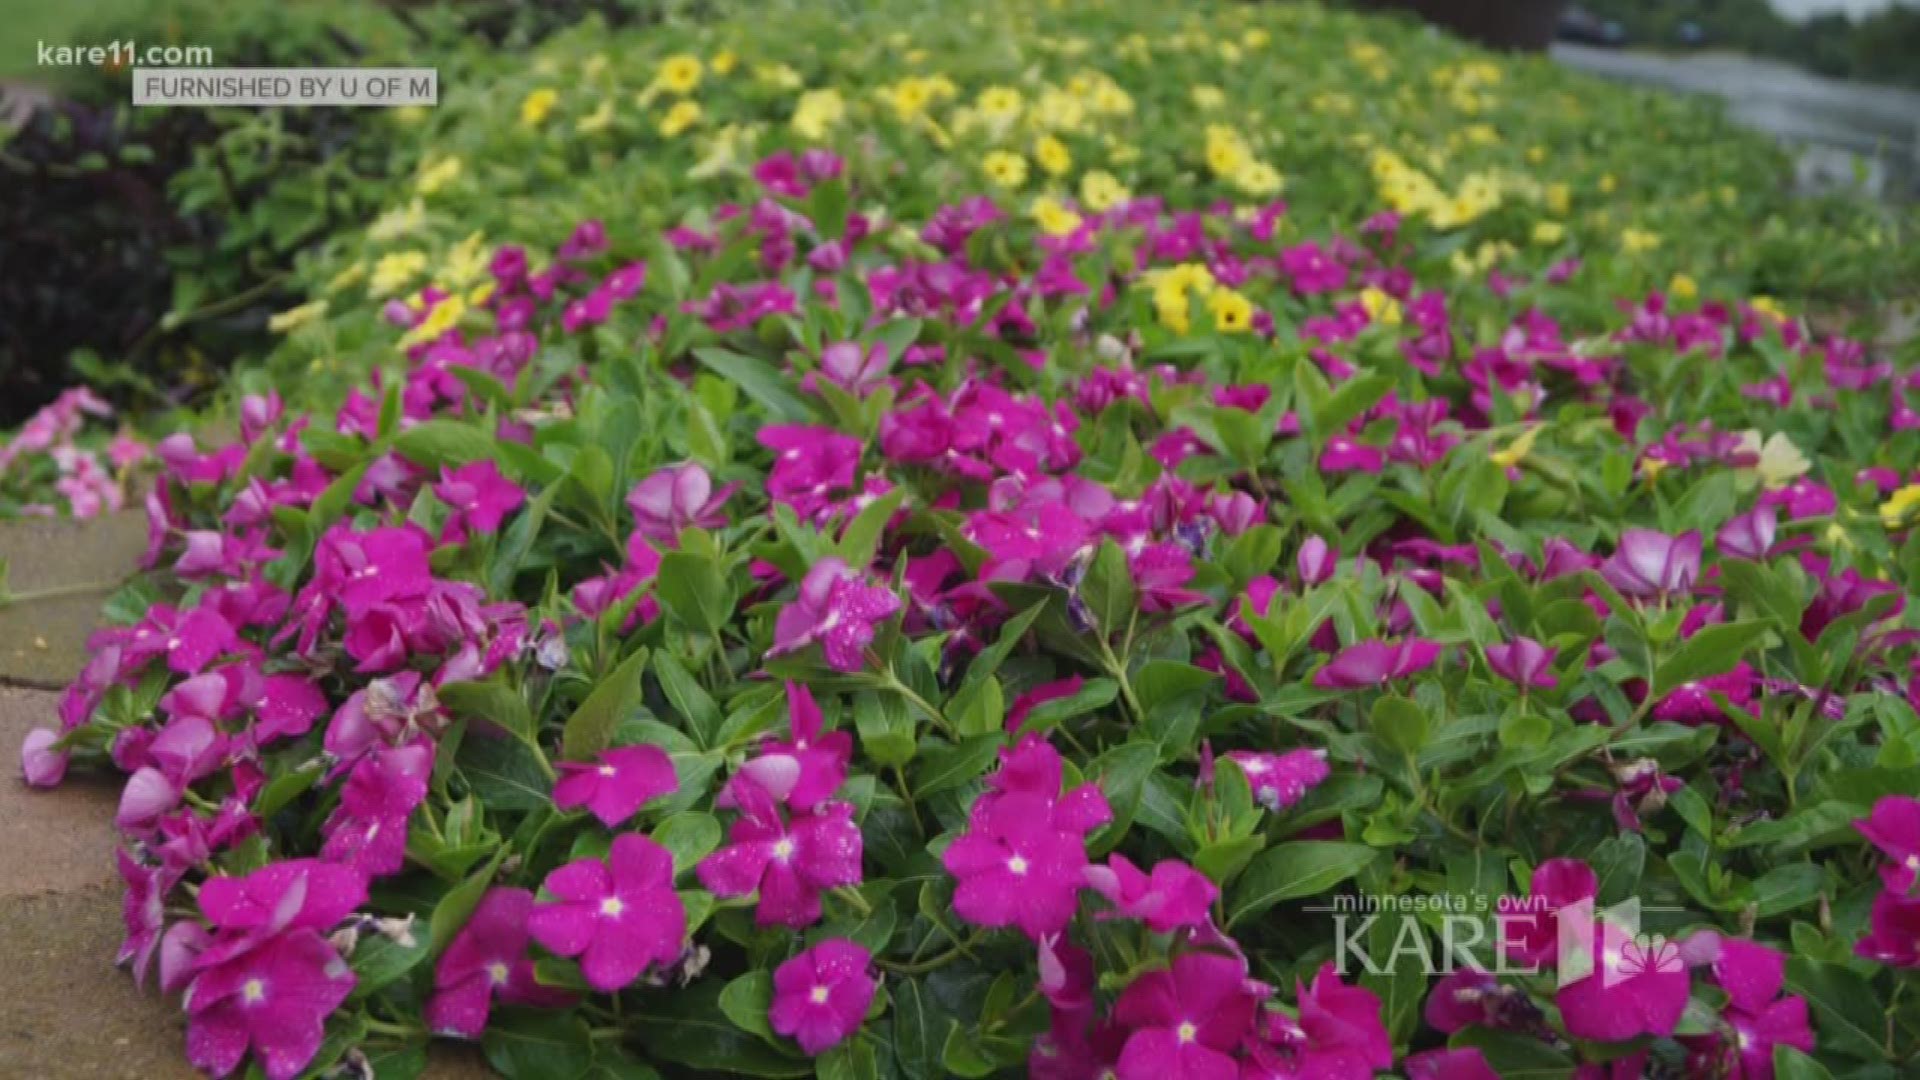 Grow with KARE: Top Ten Annuals